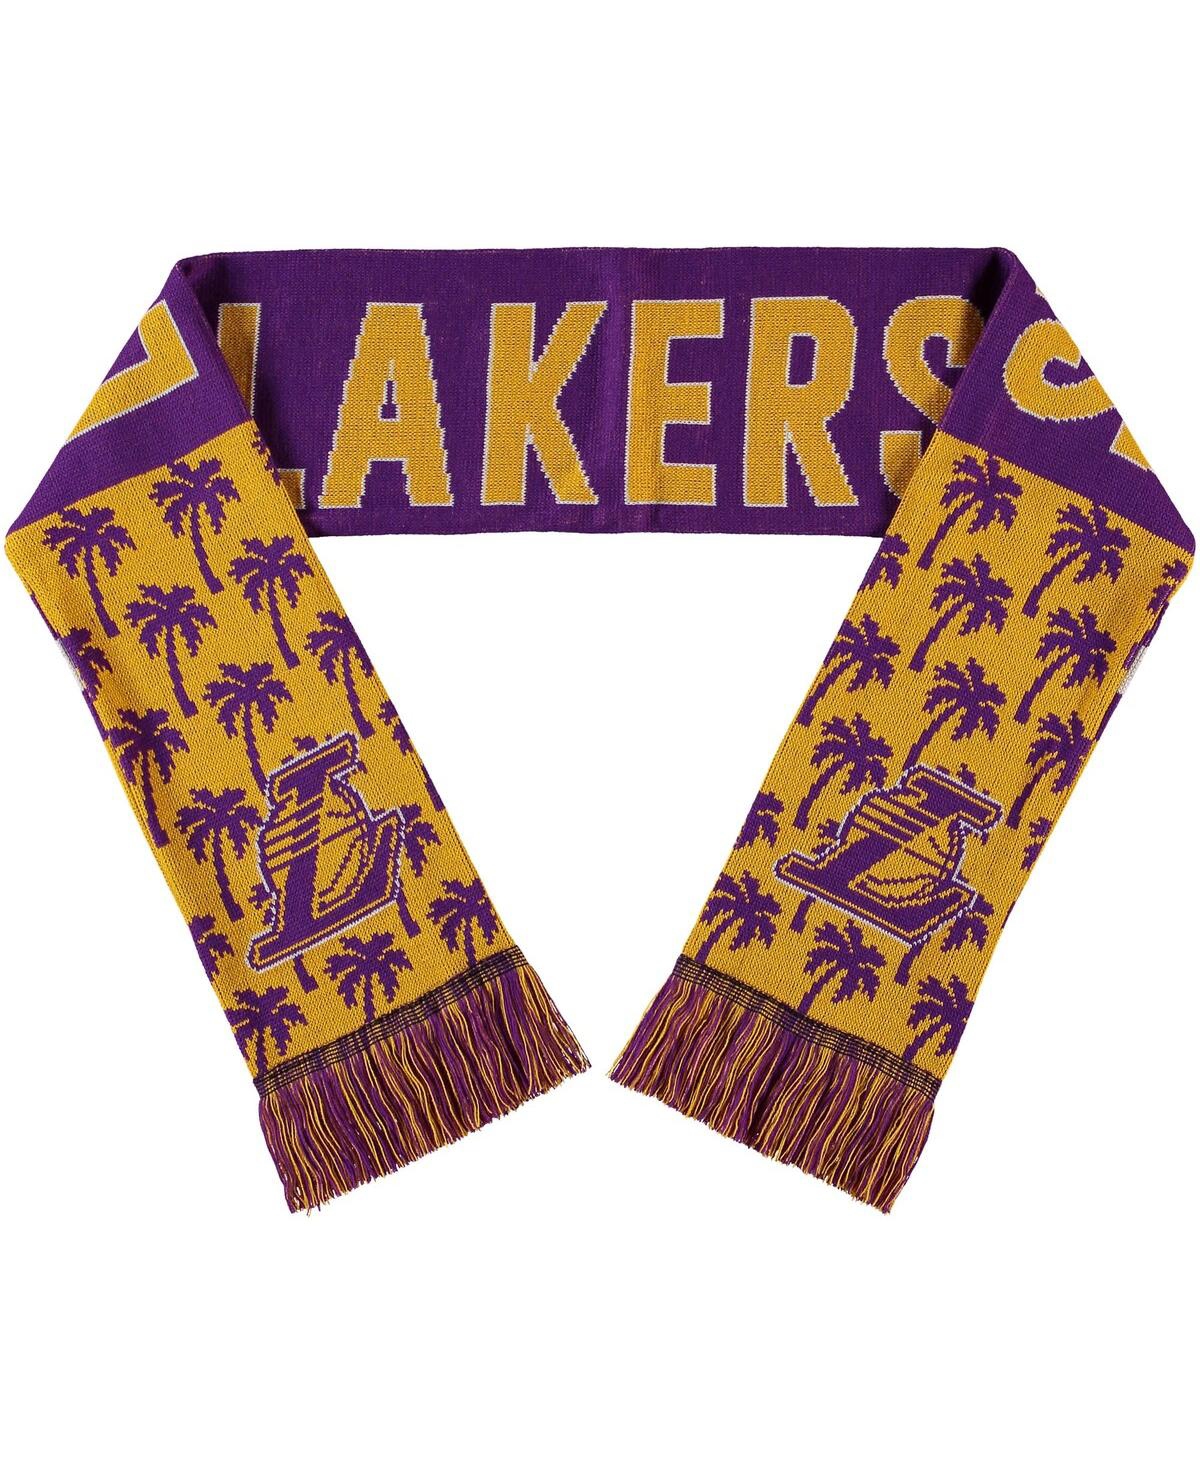 Men's and Women's Foco Los Angeles Lakers Reversible Thematic Scarf - Purple, Yellow